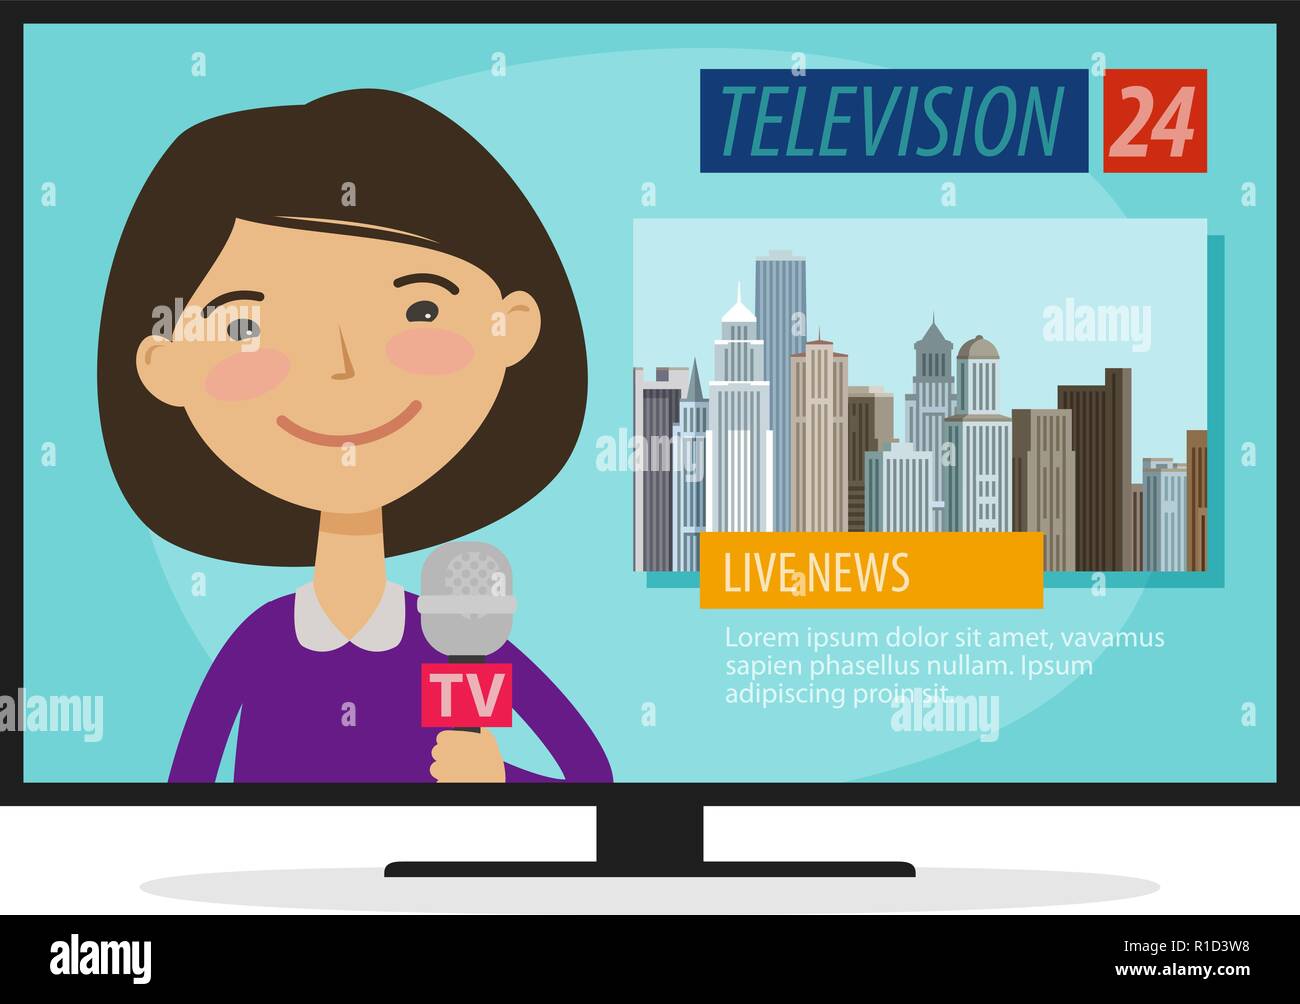 Live news. Young woman, newscaster with microphone in hand. TV, television concept. Cartoon vector illustration Stock Vector